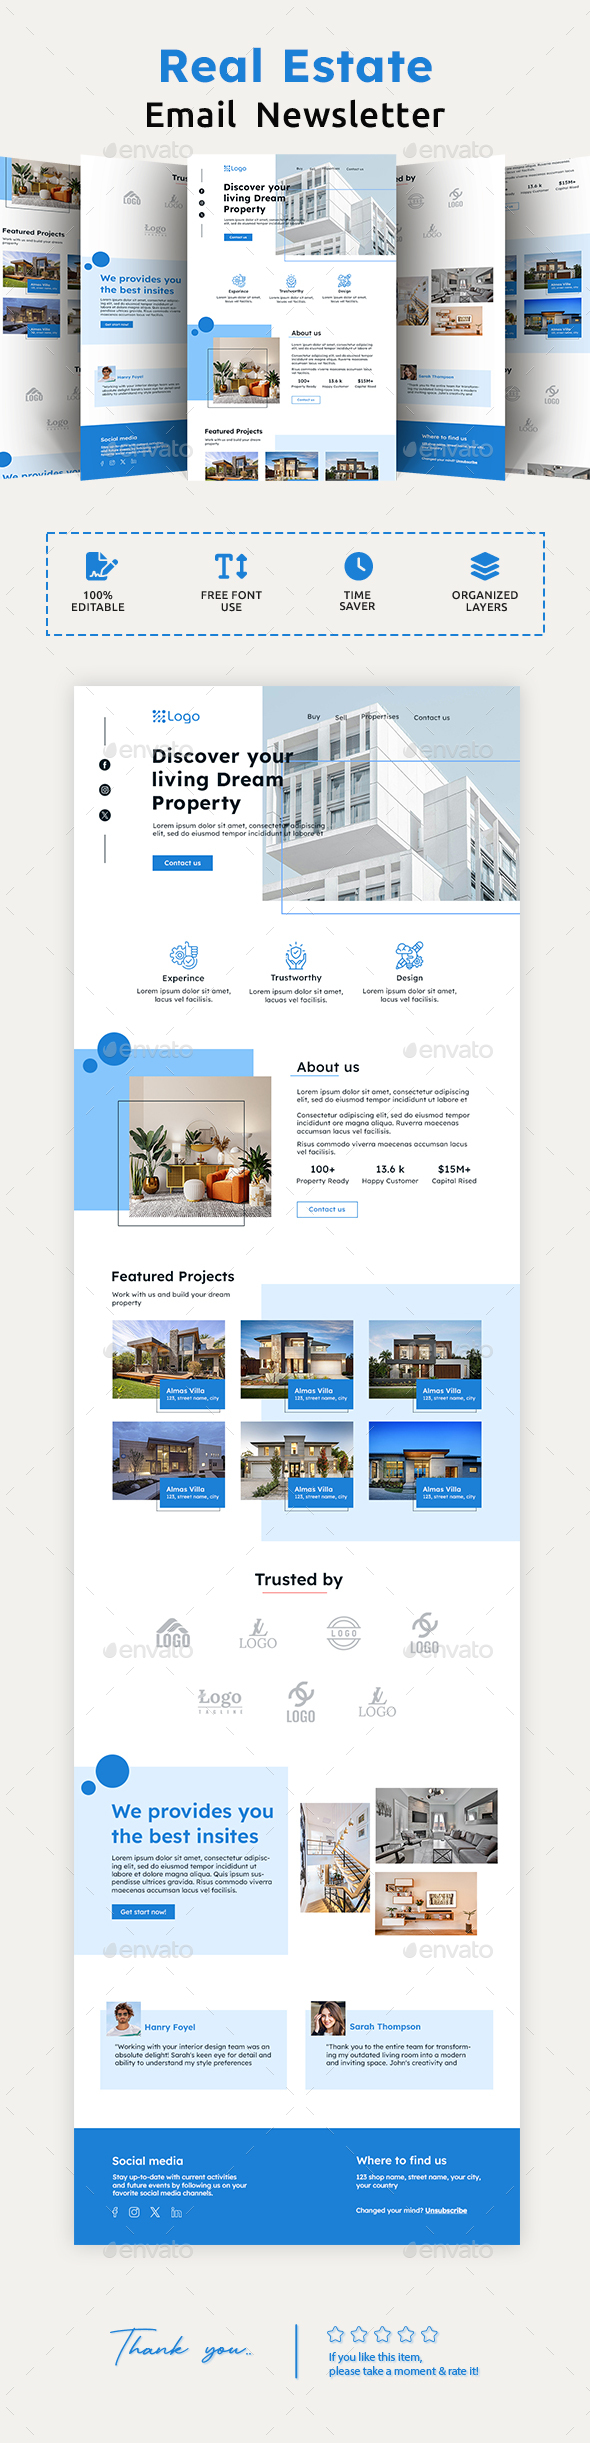 [DOWNLOAD]Real Estate Housing Newsletter PSD Template